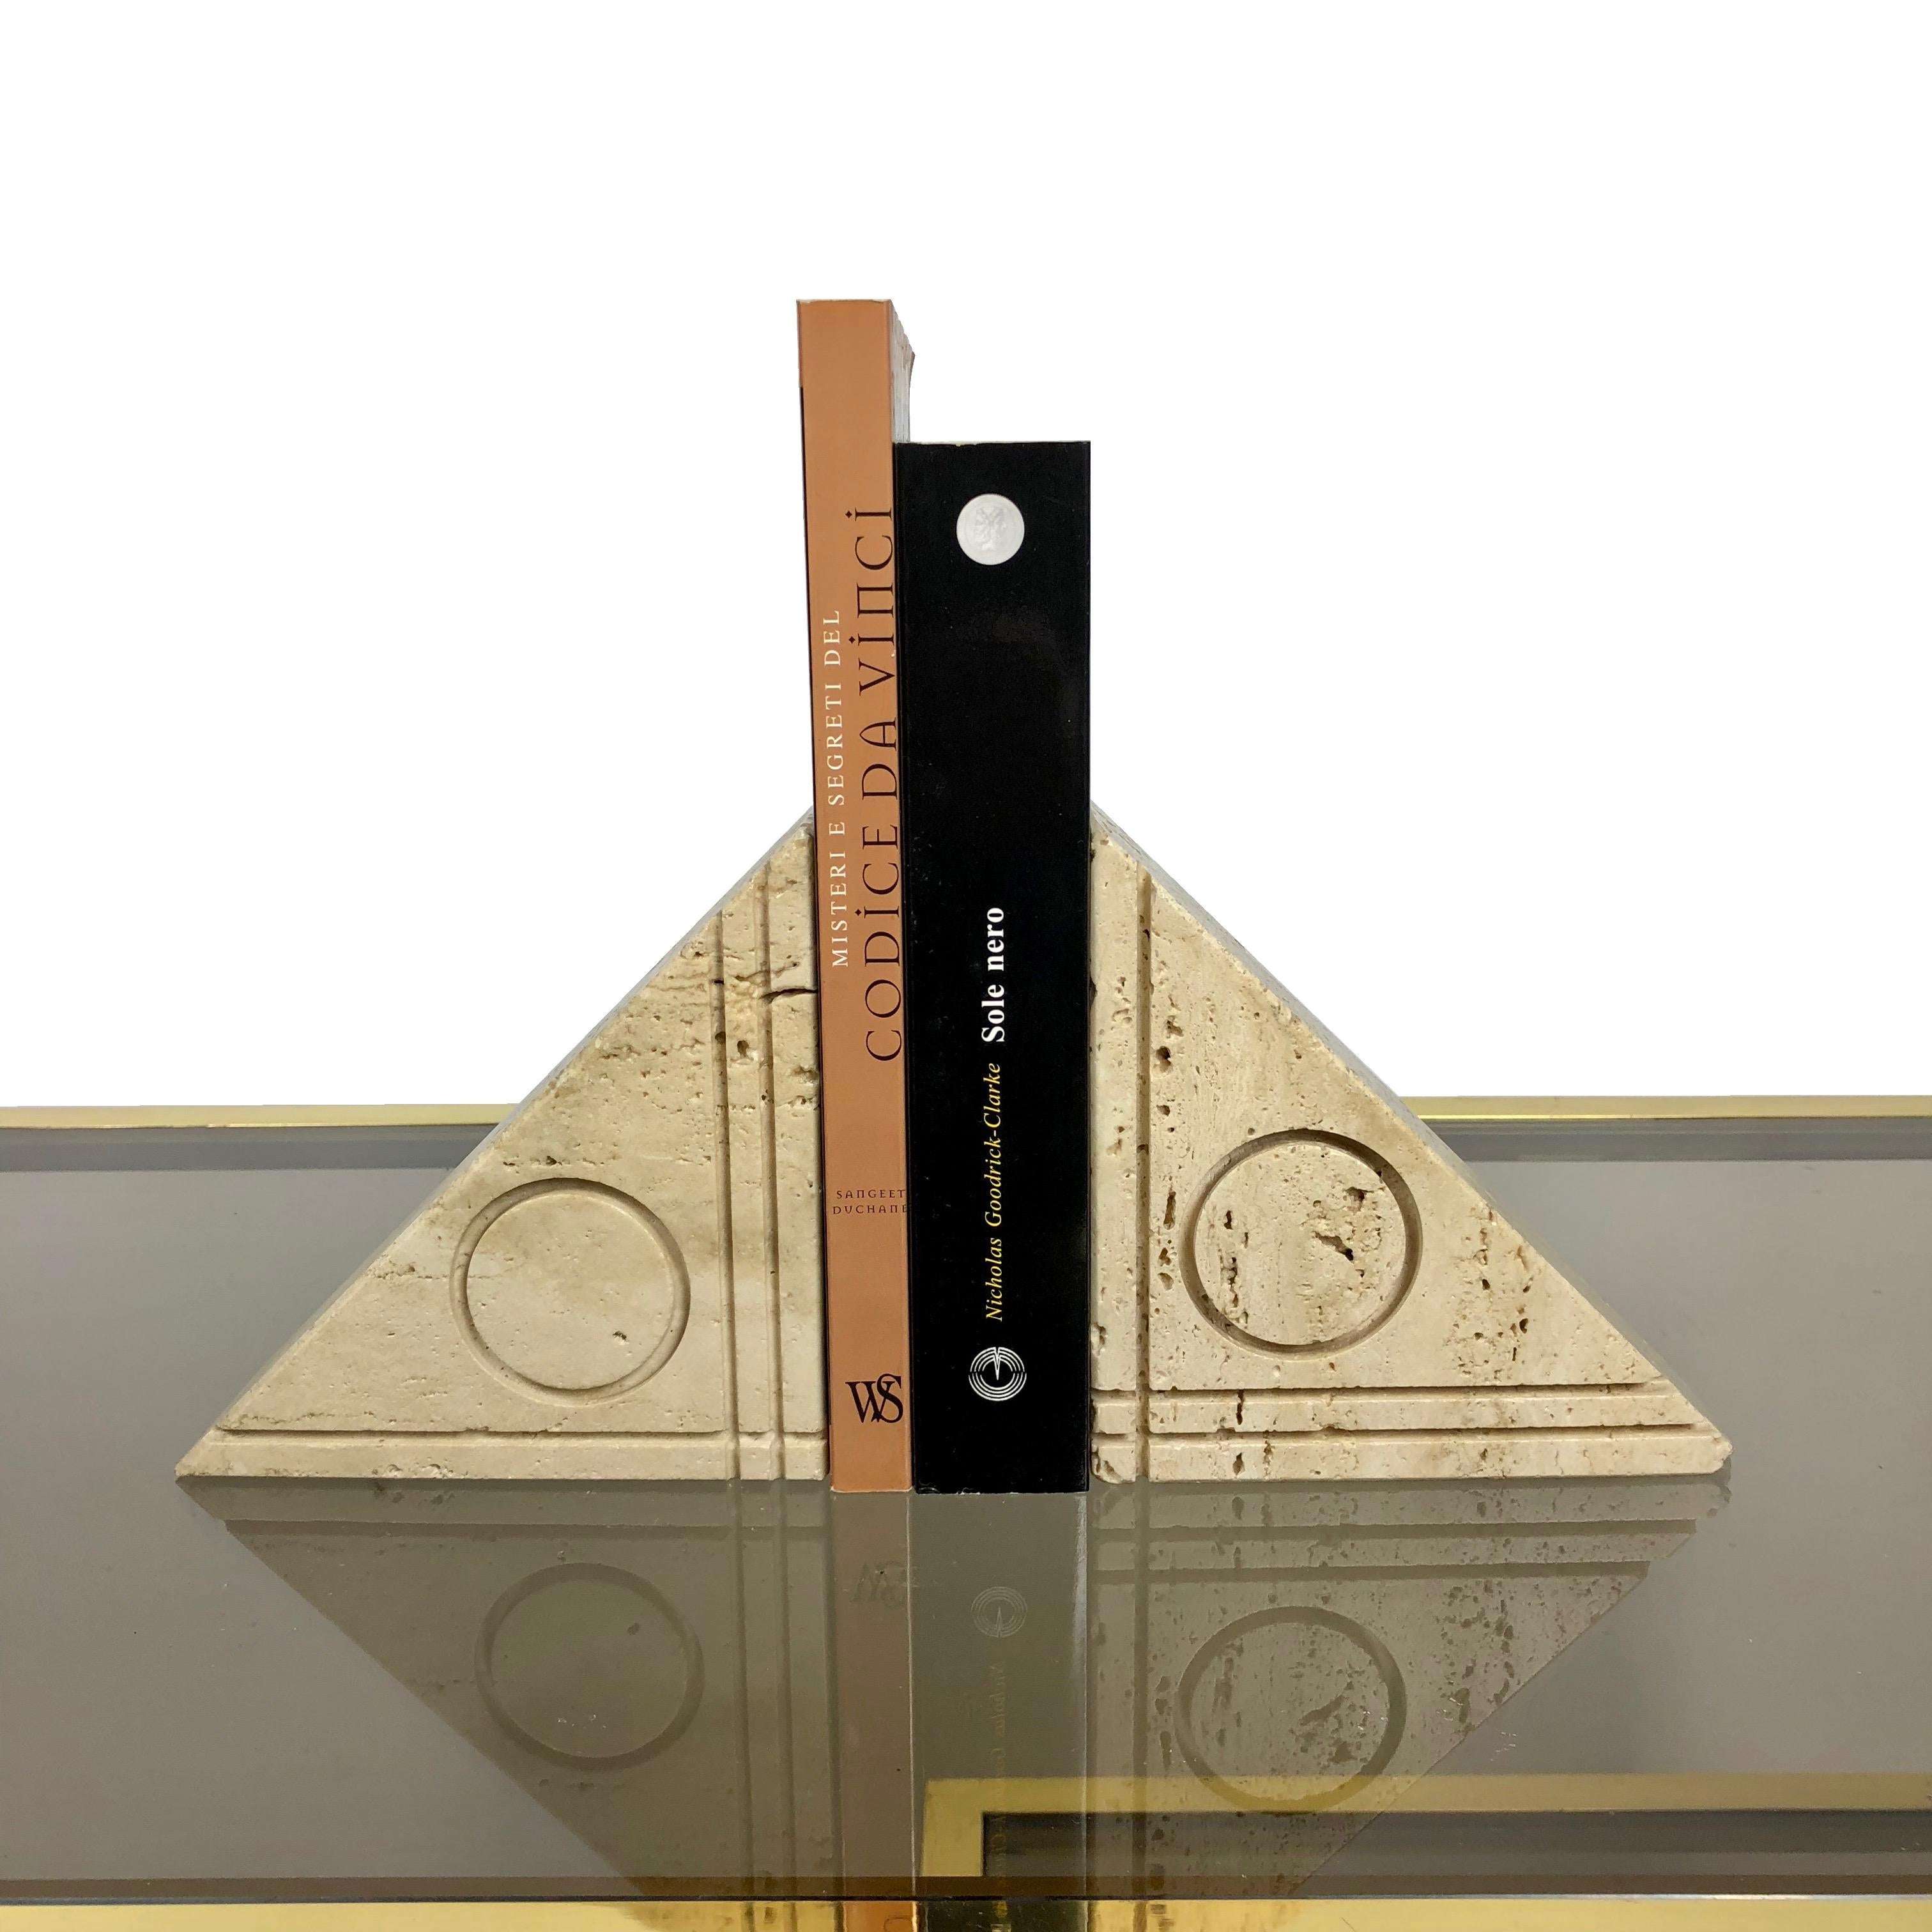 Pair of triangular bookends in the style of the Italian designer Angelo Mangiarotti in real travertine. A circle and three lines that intersect to form a right angle are engraved on both of the items.